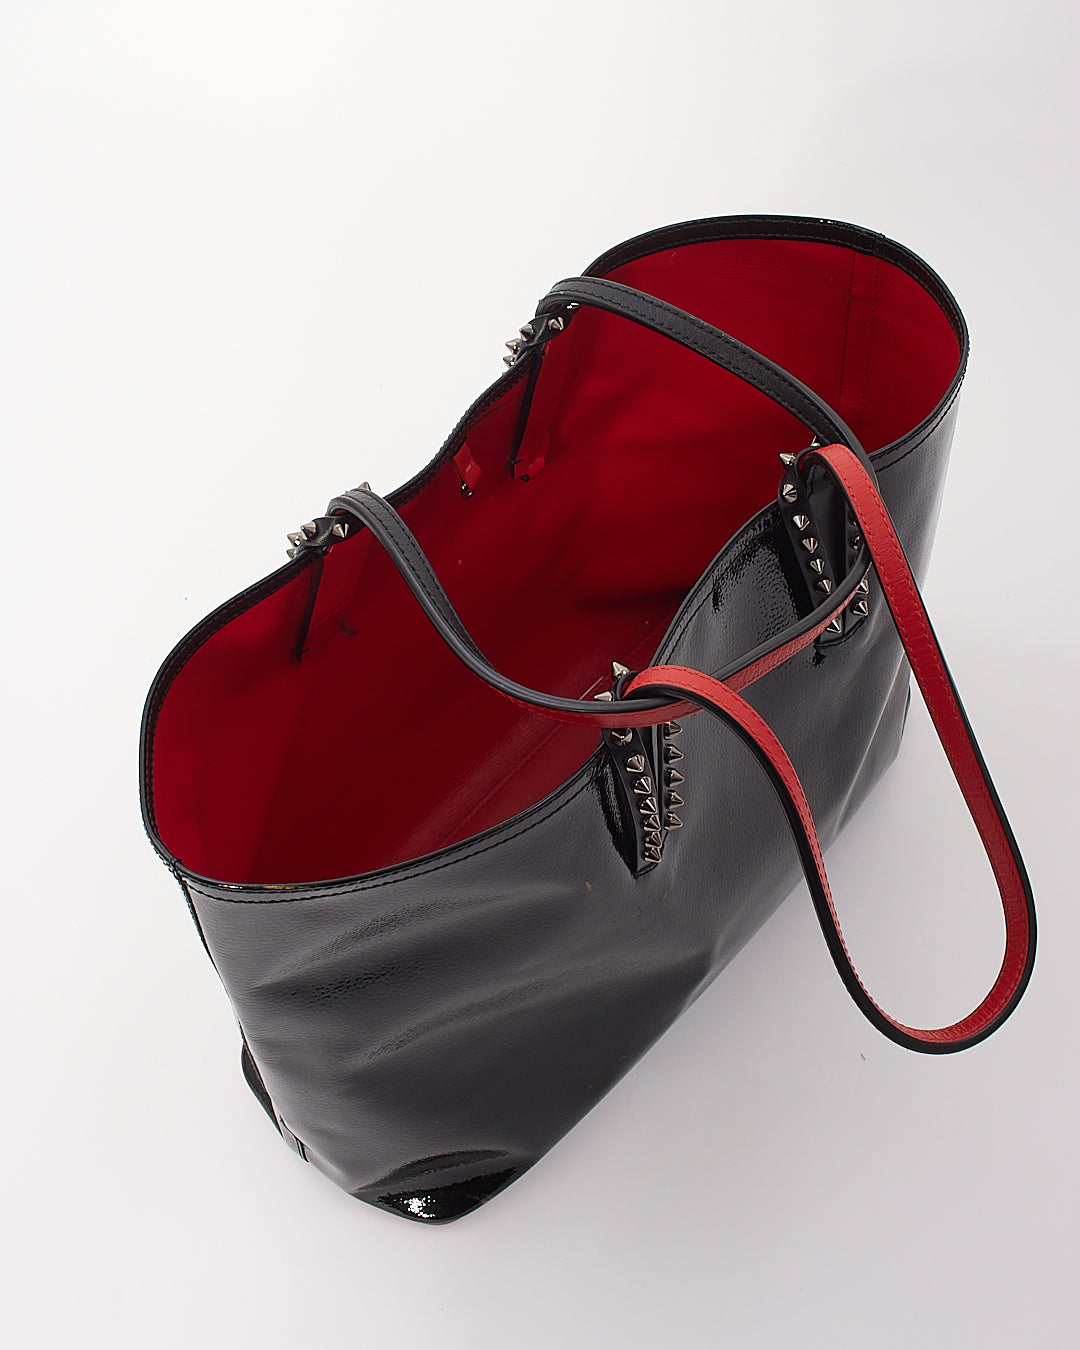 Christian Louboutin Black Patent Studded Tote with Pochette